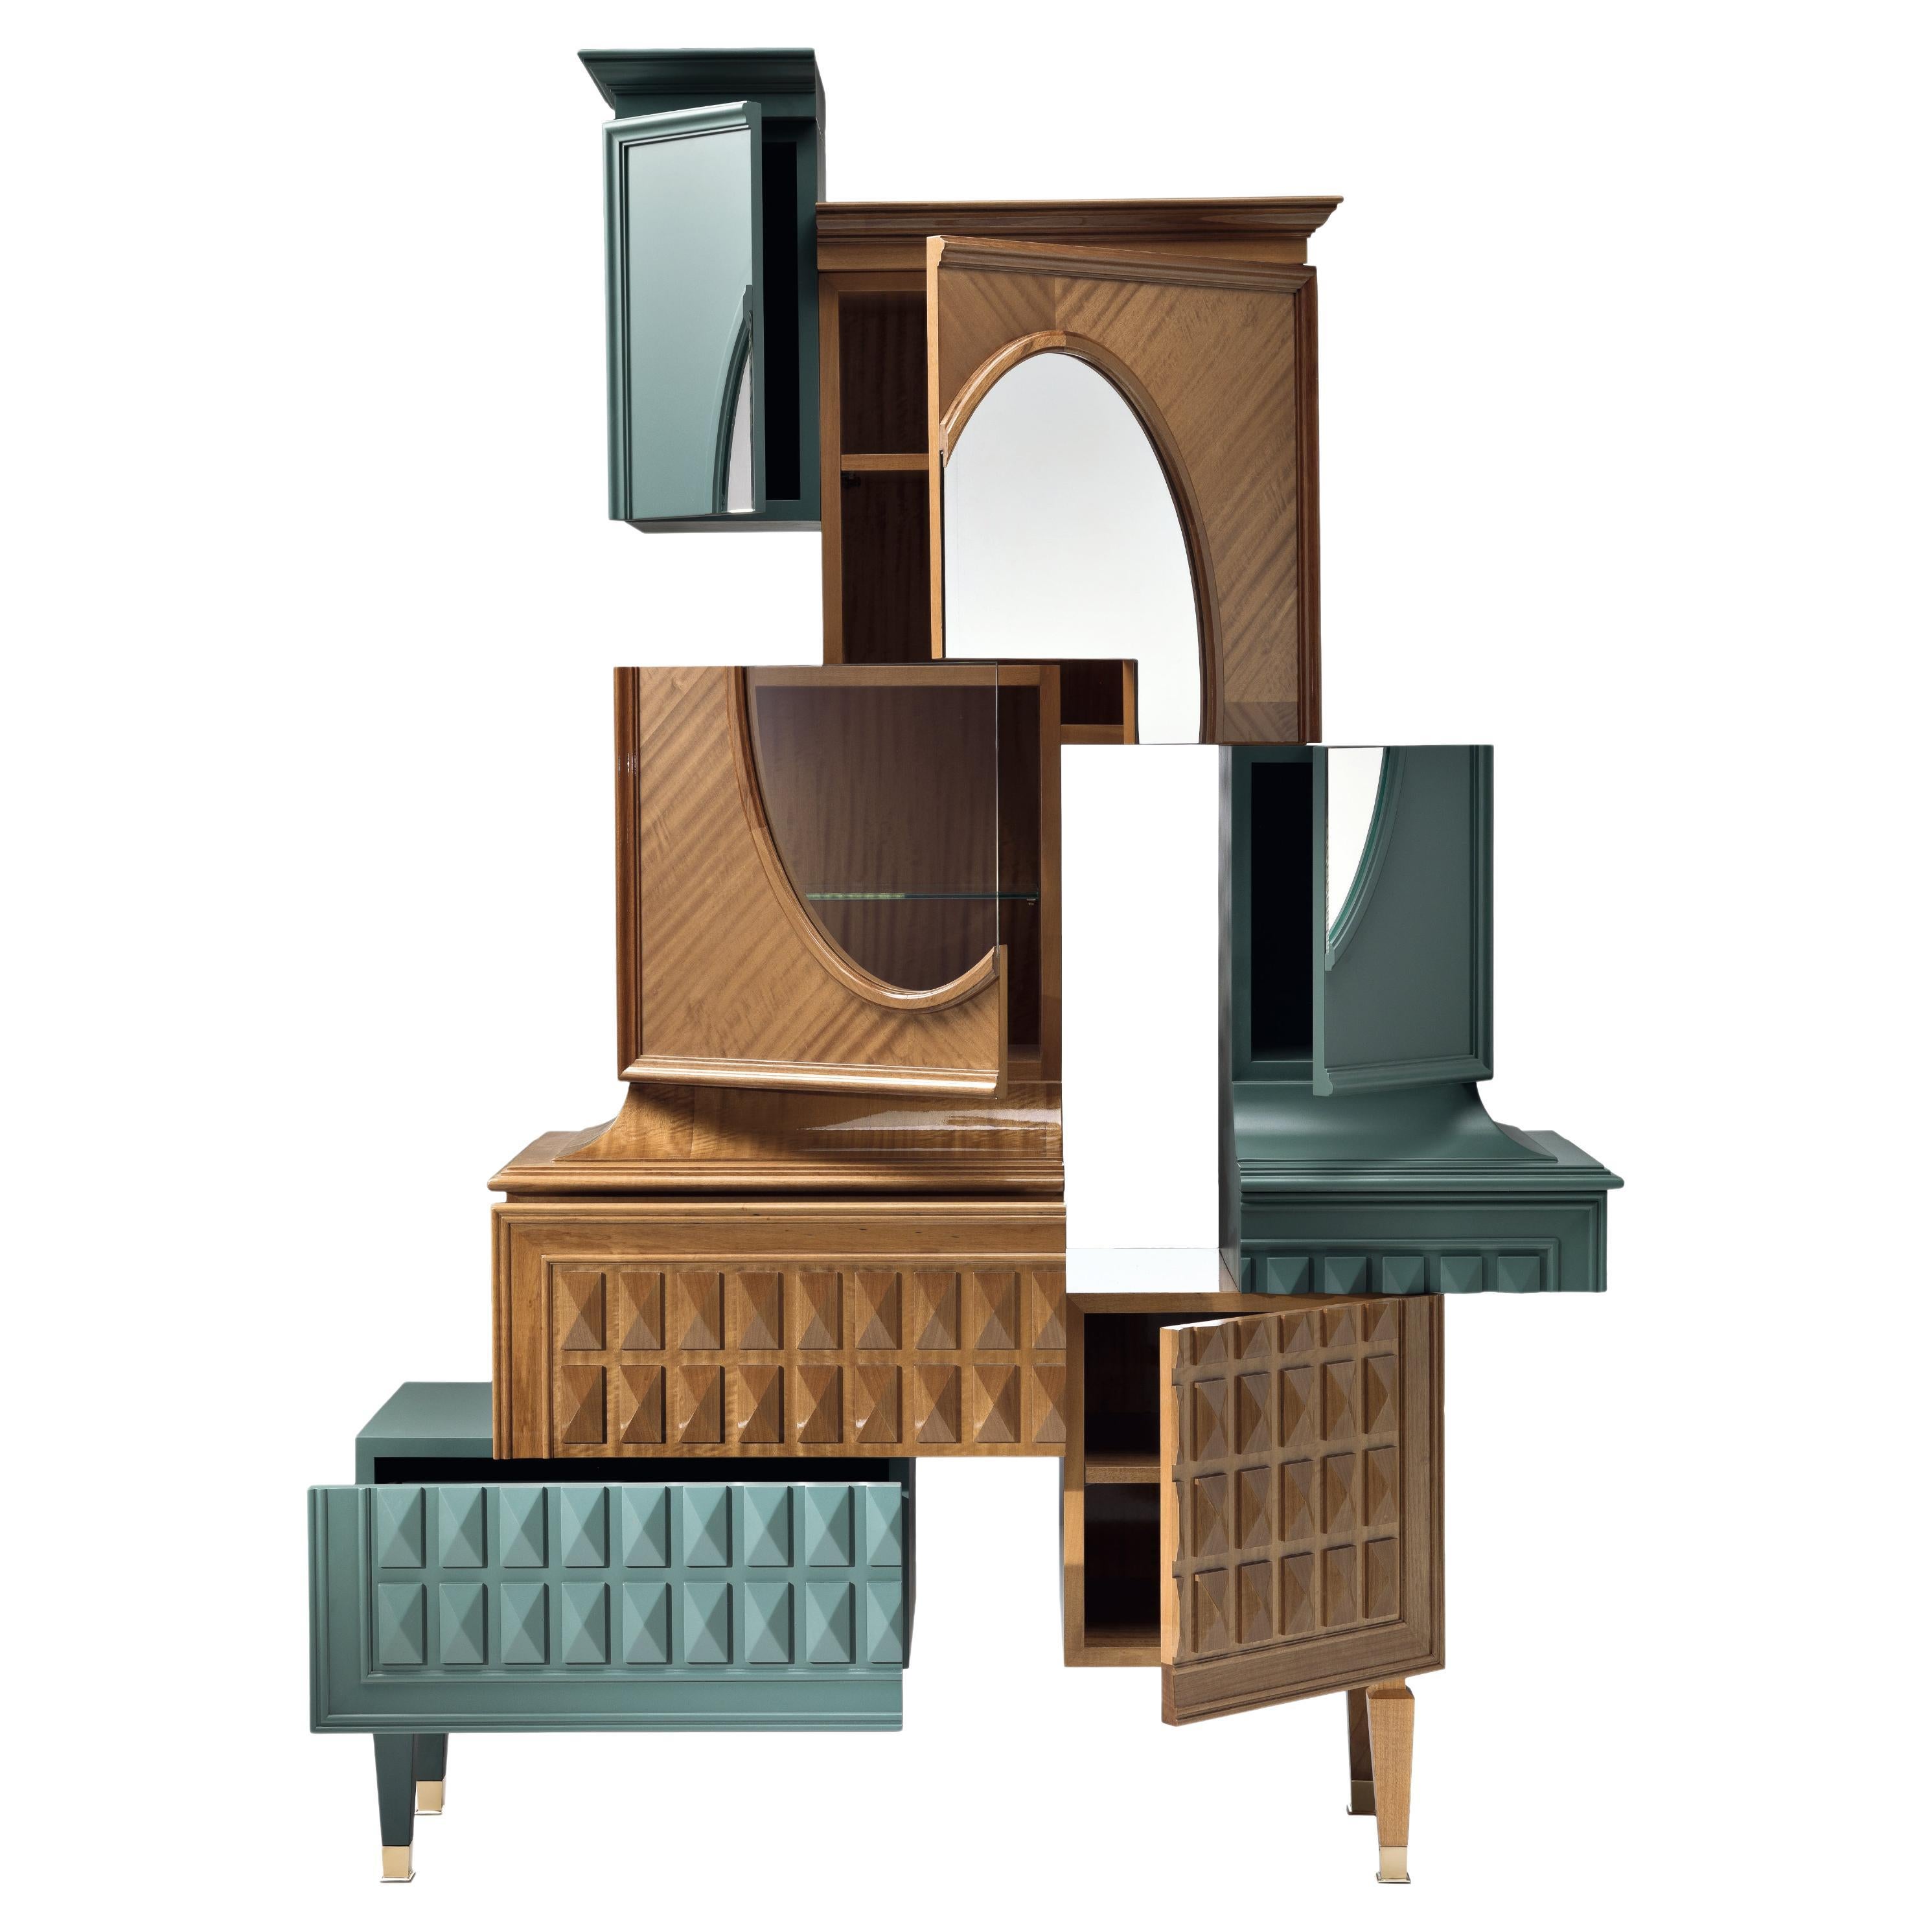 D/Vision.2 Greene & Greene Brown Deconstructed Trumeau in Solid Wood, Glass and Brass (en bois massif, verre et laiton)